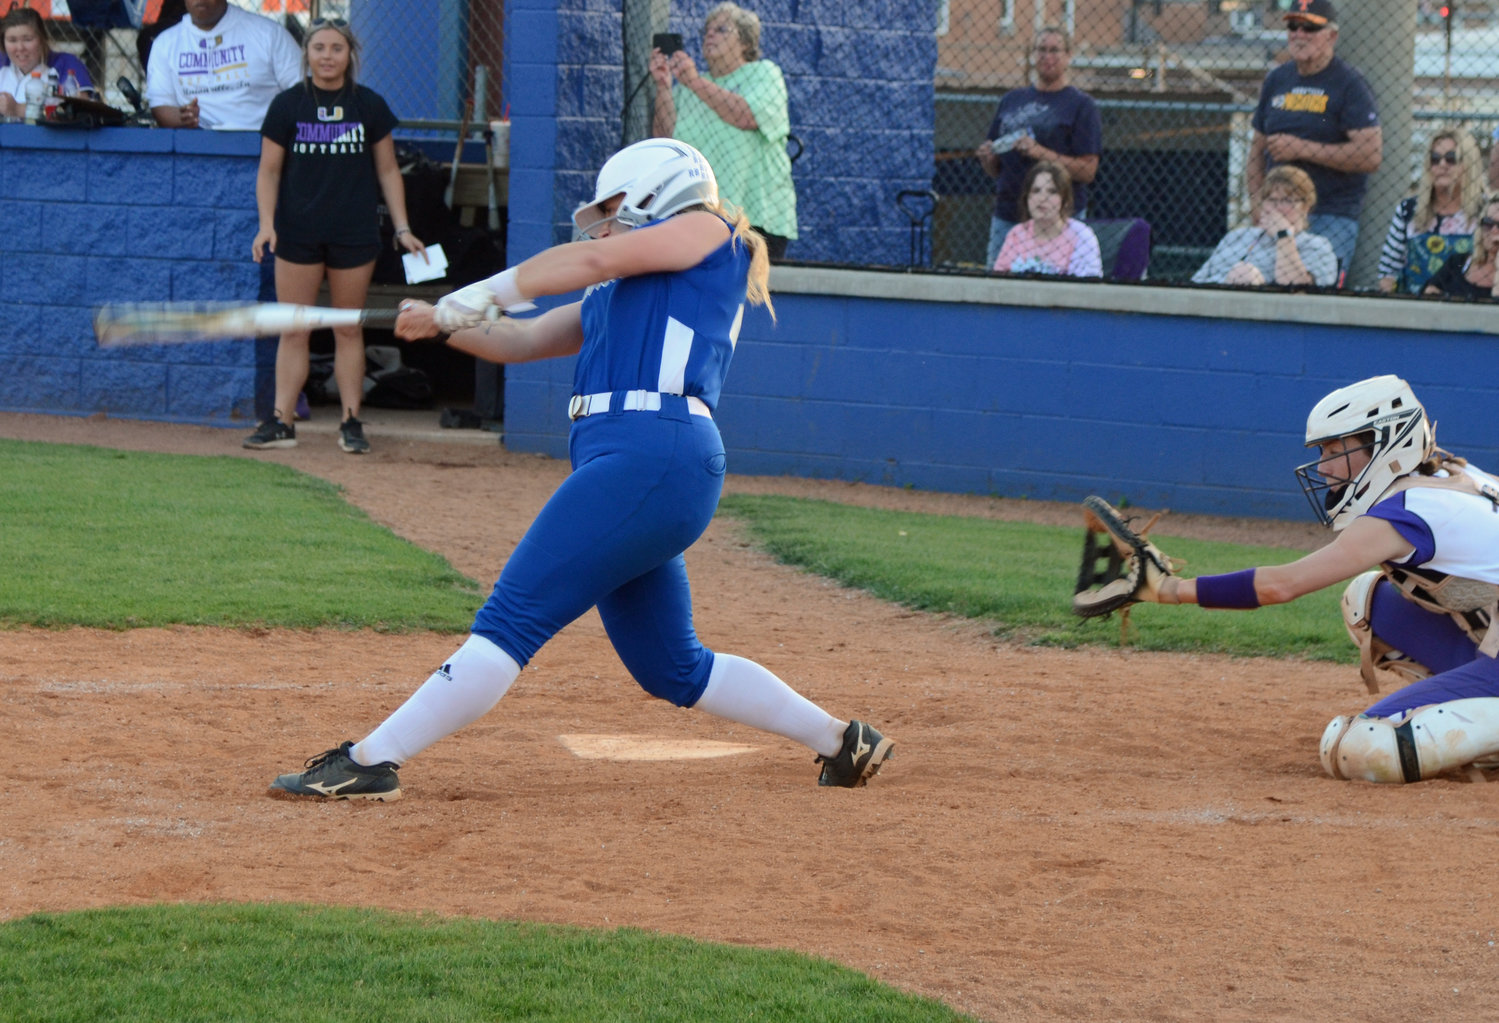 Leslie Bartoli delivers the game-tying single in the bottom of the seventh inning for the Lady Rockets, who came back to beat Community 5-4 in 10 innings Tuesday night in the second round of the District 7-AA Tournament at Chapel Hill.